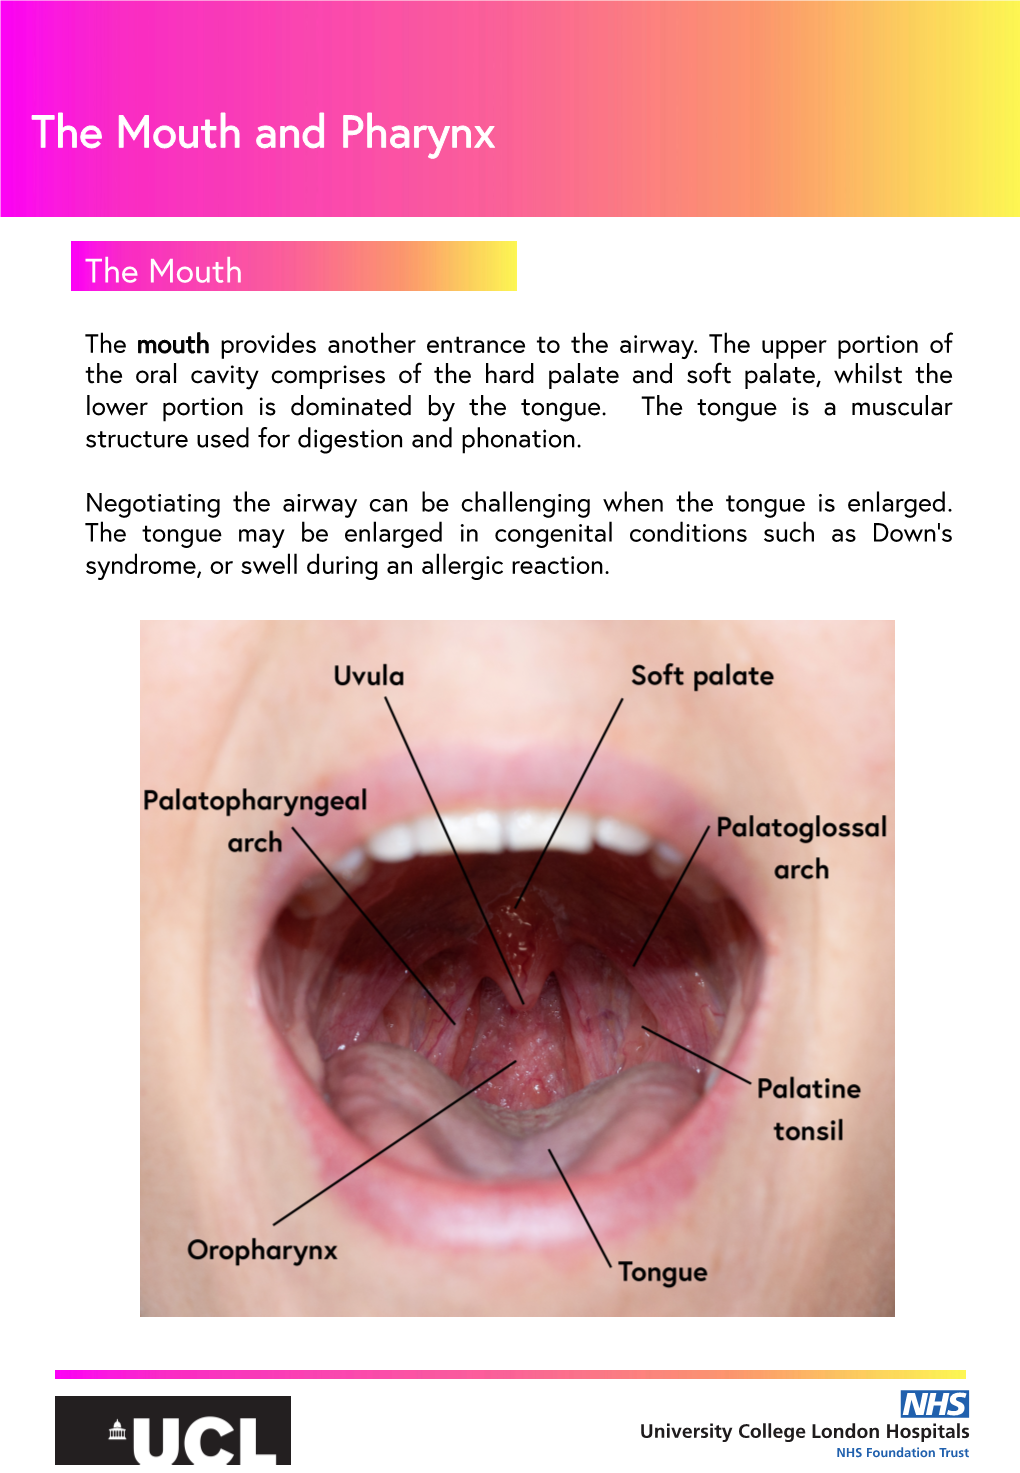 The Mouth and Pharynx